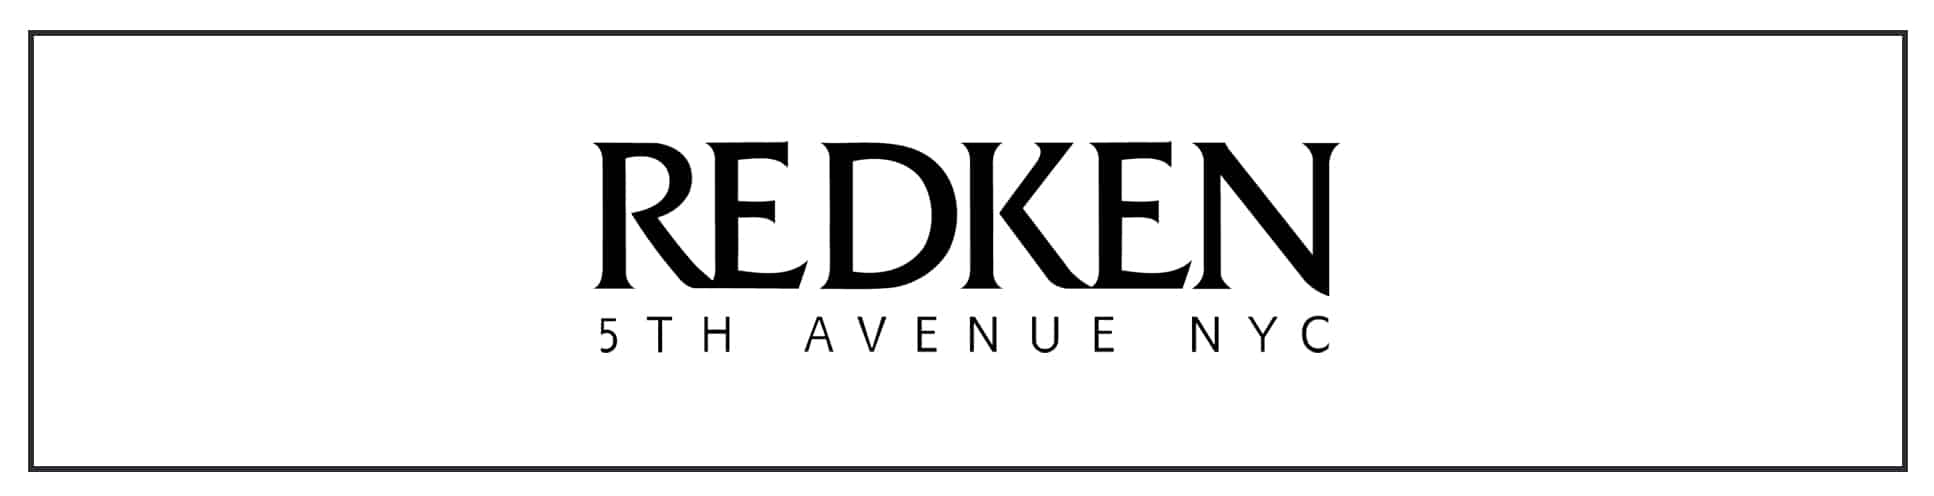 The logo for redken 5th avenue nyc.